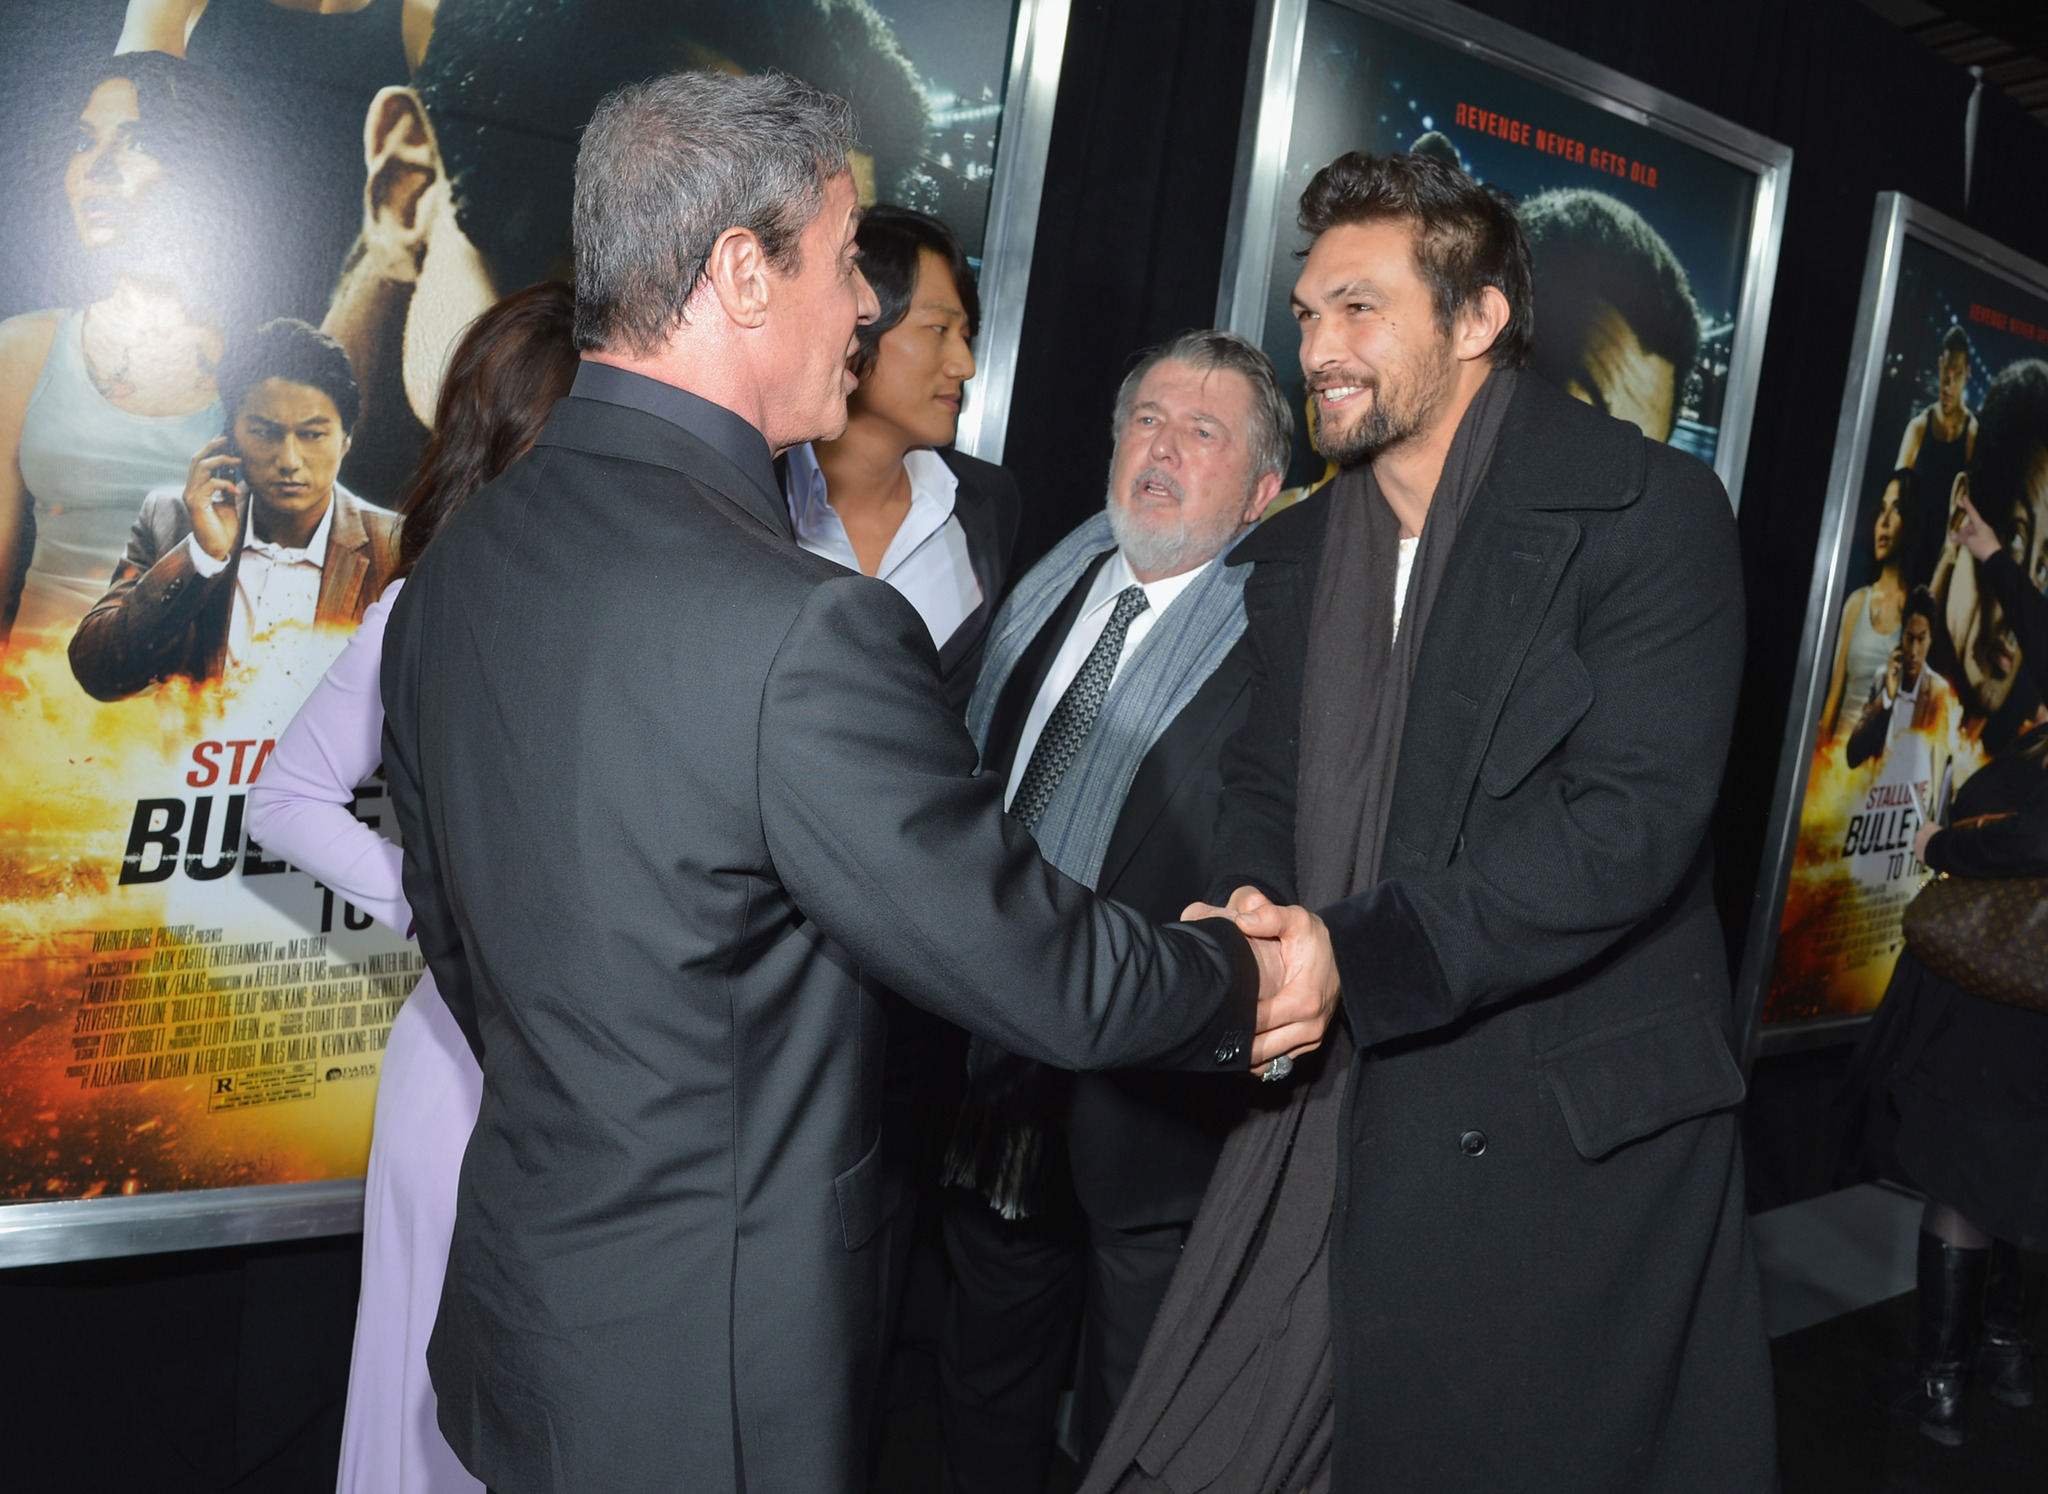 Sylvester Stallone, Walter Hill and Jason Momoa at event of Bullet to the Head (2012)